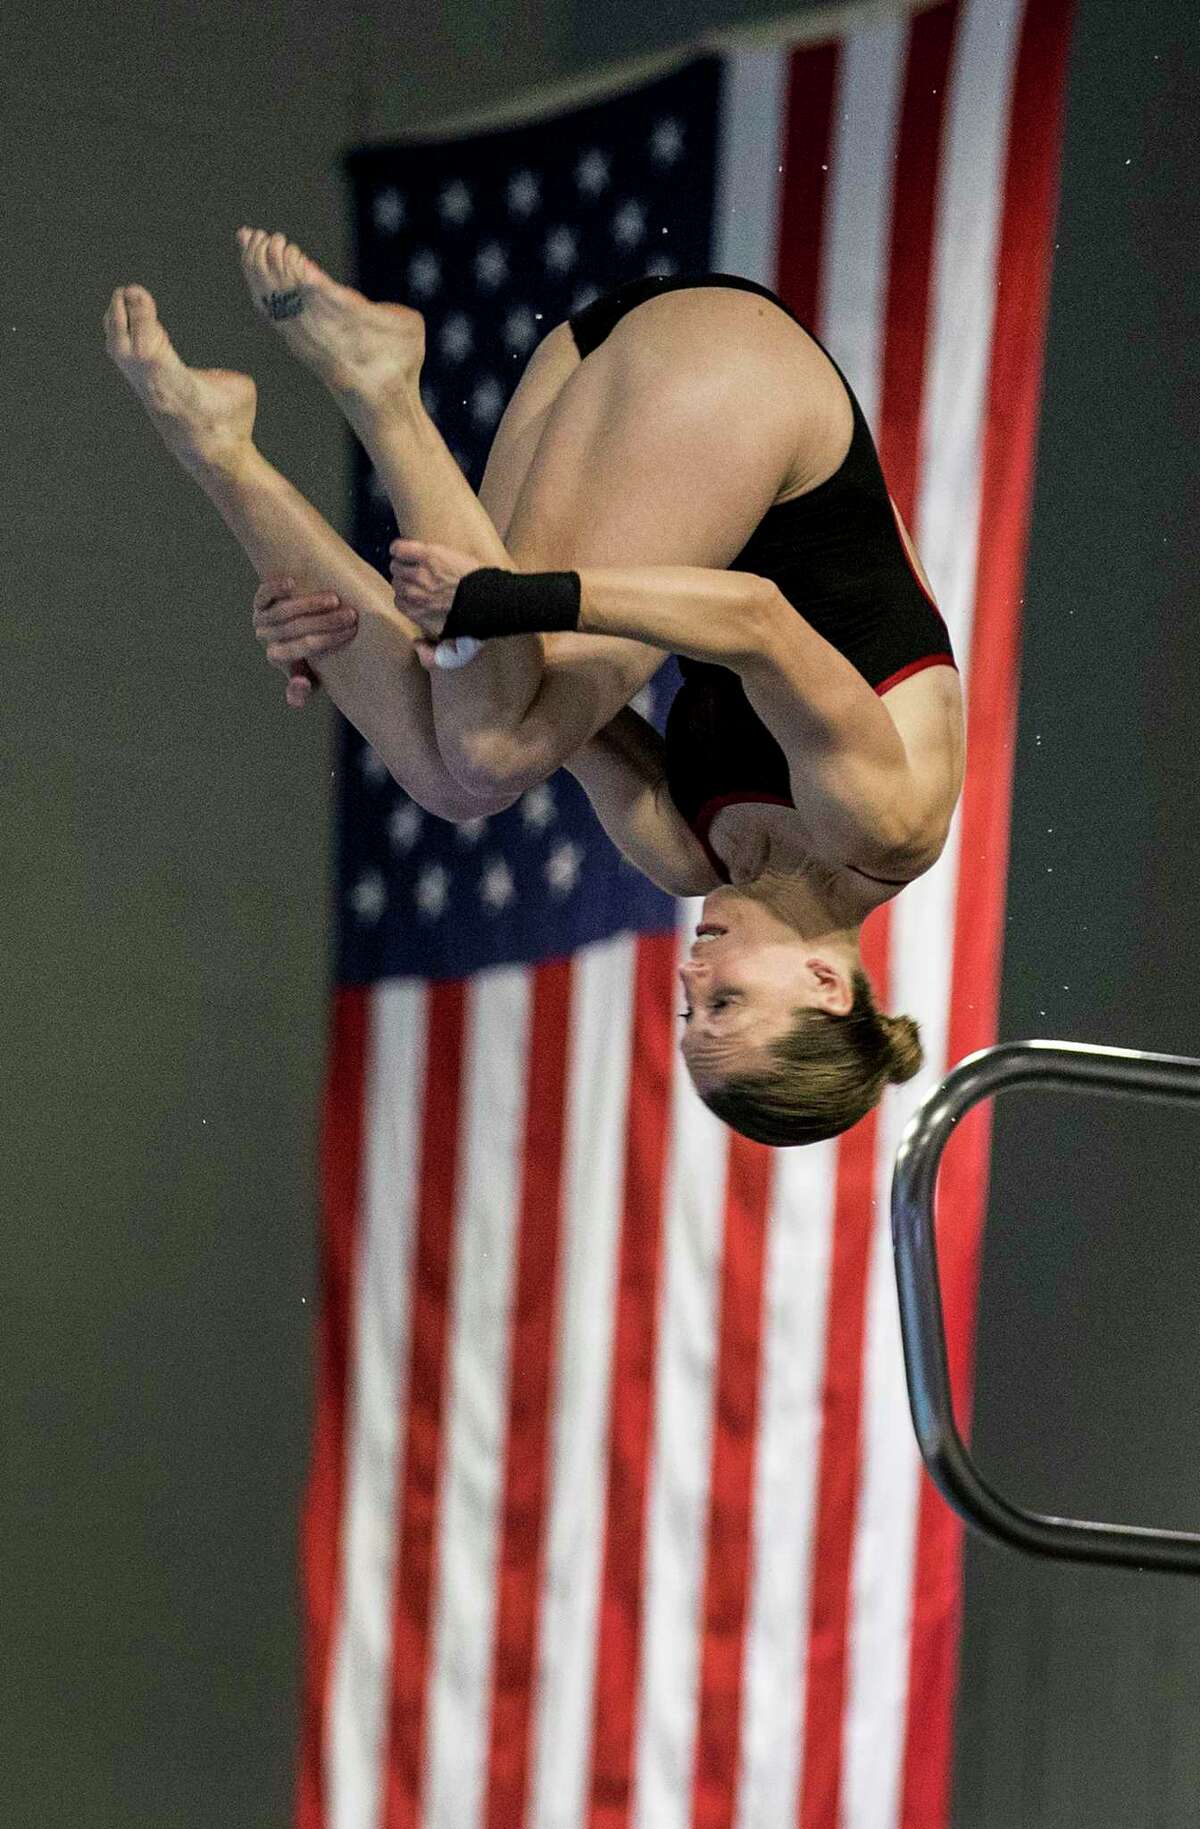 Wilkinson will participate in USA Diving's zone championships June 21-25 at Moultrie, Ga., where she could qualify for the U.S. nationals a month later.